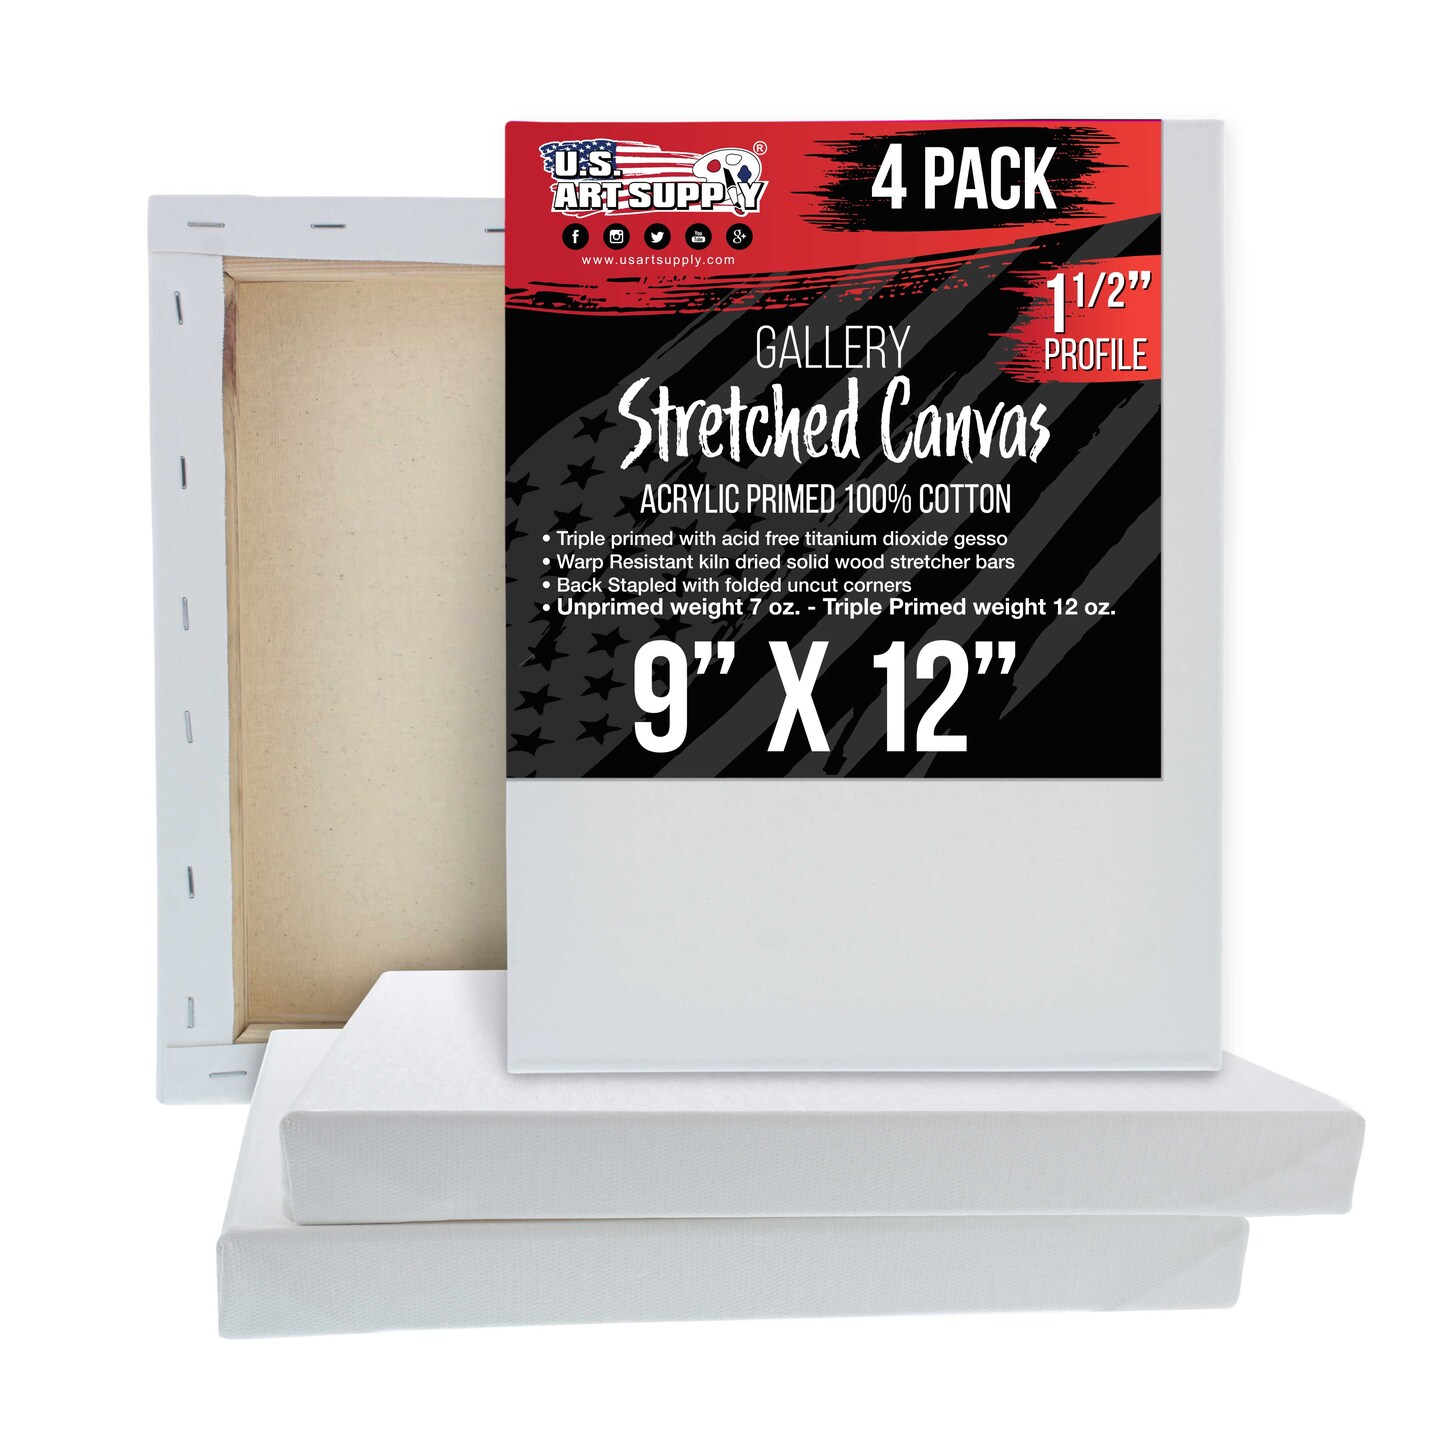 9 x 12 inch Gallery Depth 1-1/2&#x22; Profile Stretched Canvas, 4-Pack - 12-Ounce Acrylic Gesso Triple Primed, - Professional Artist Quality, 100% Cotton